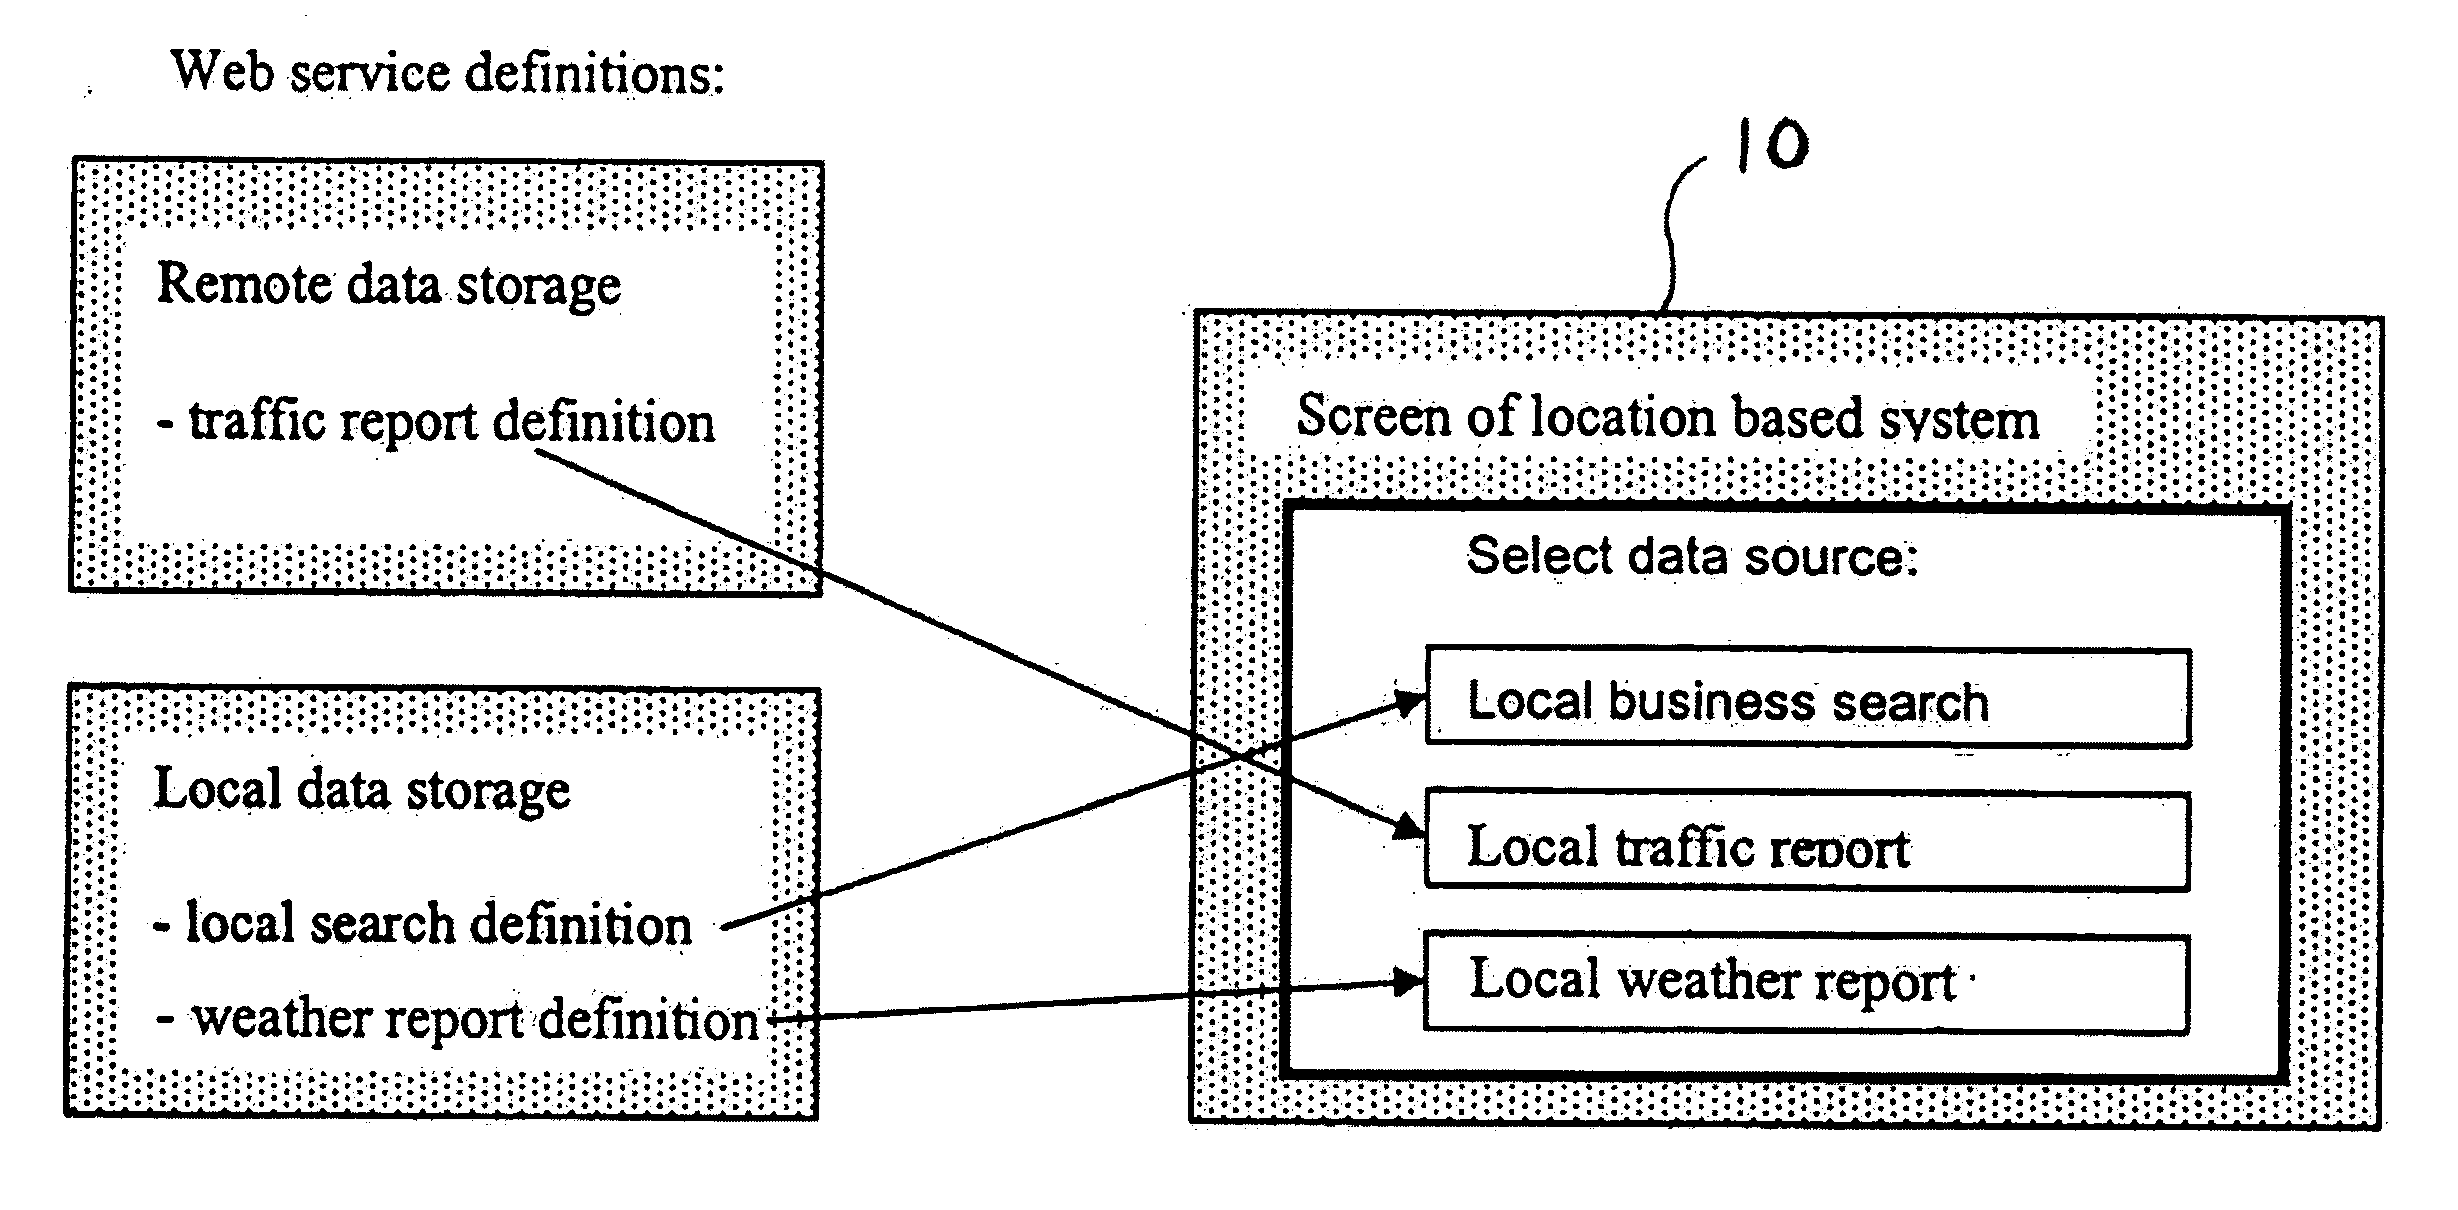 Apparatus and method for universal data access by location based systems